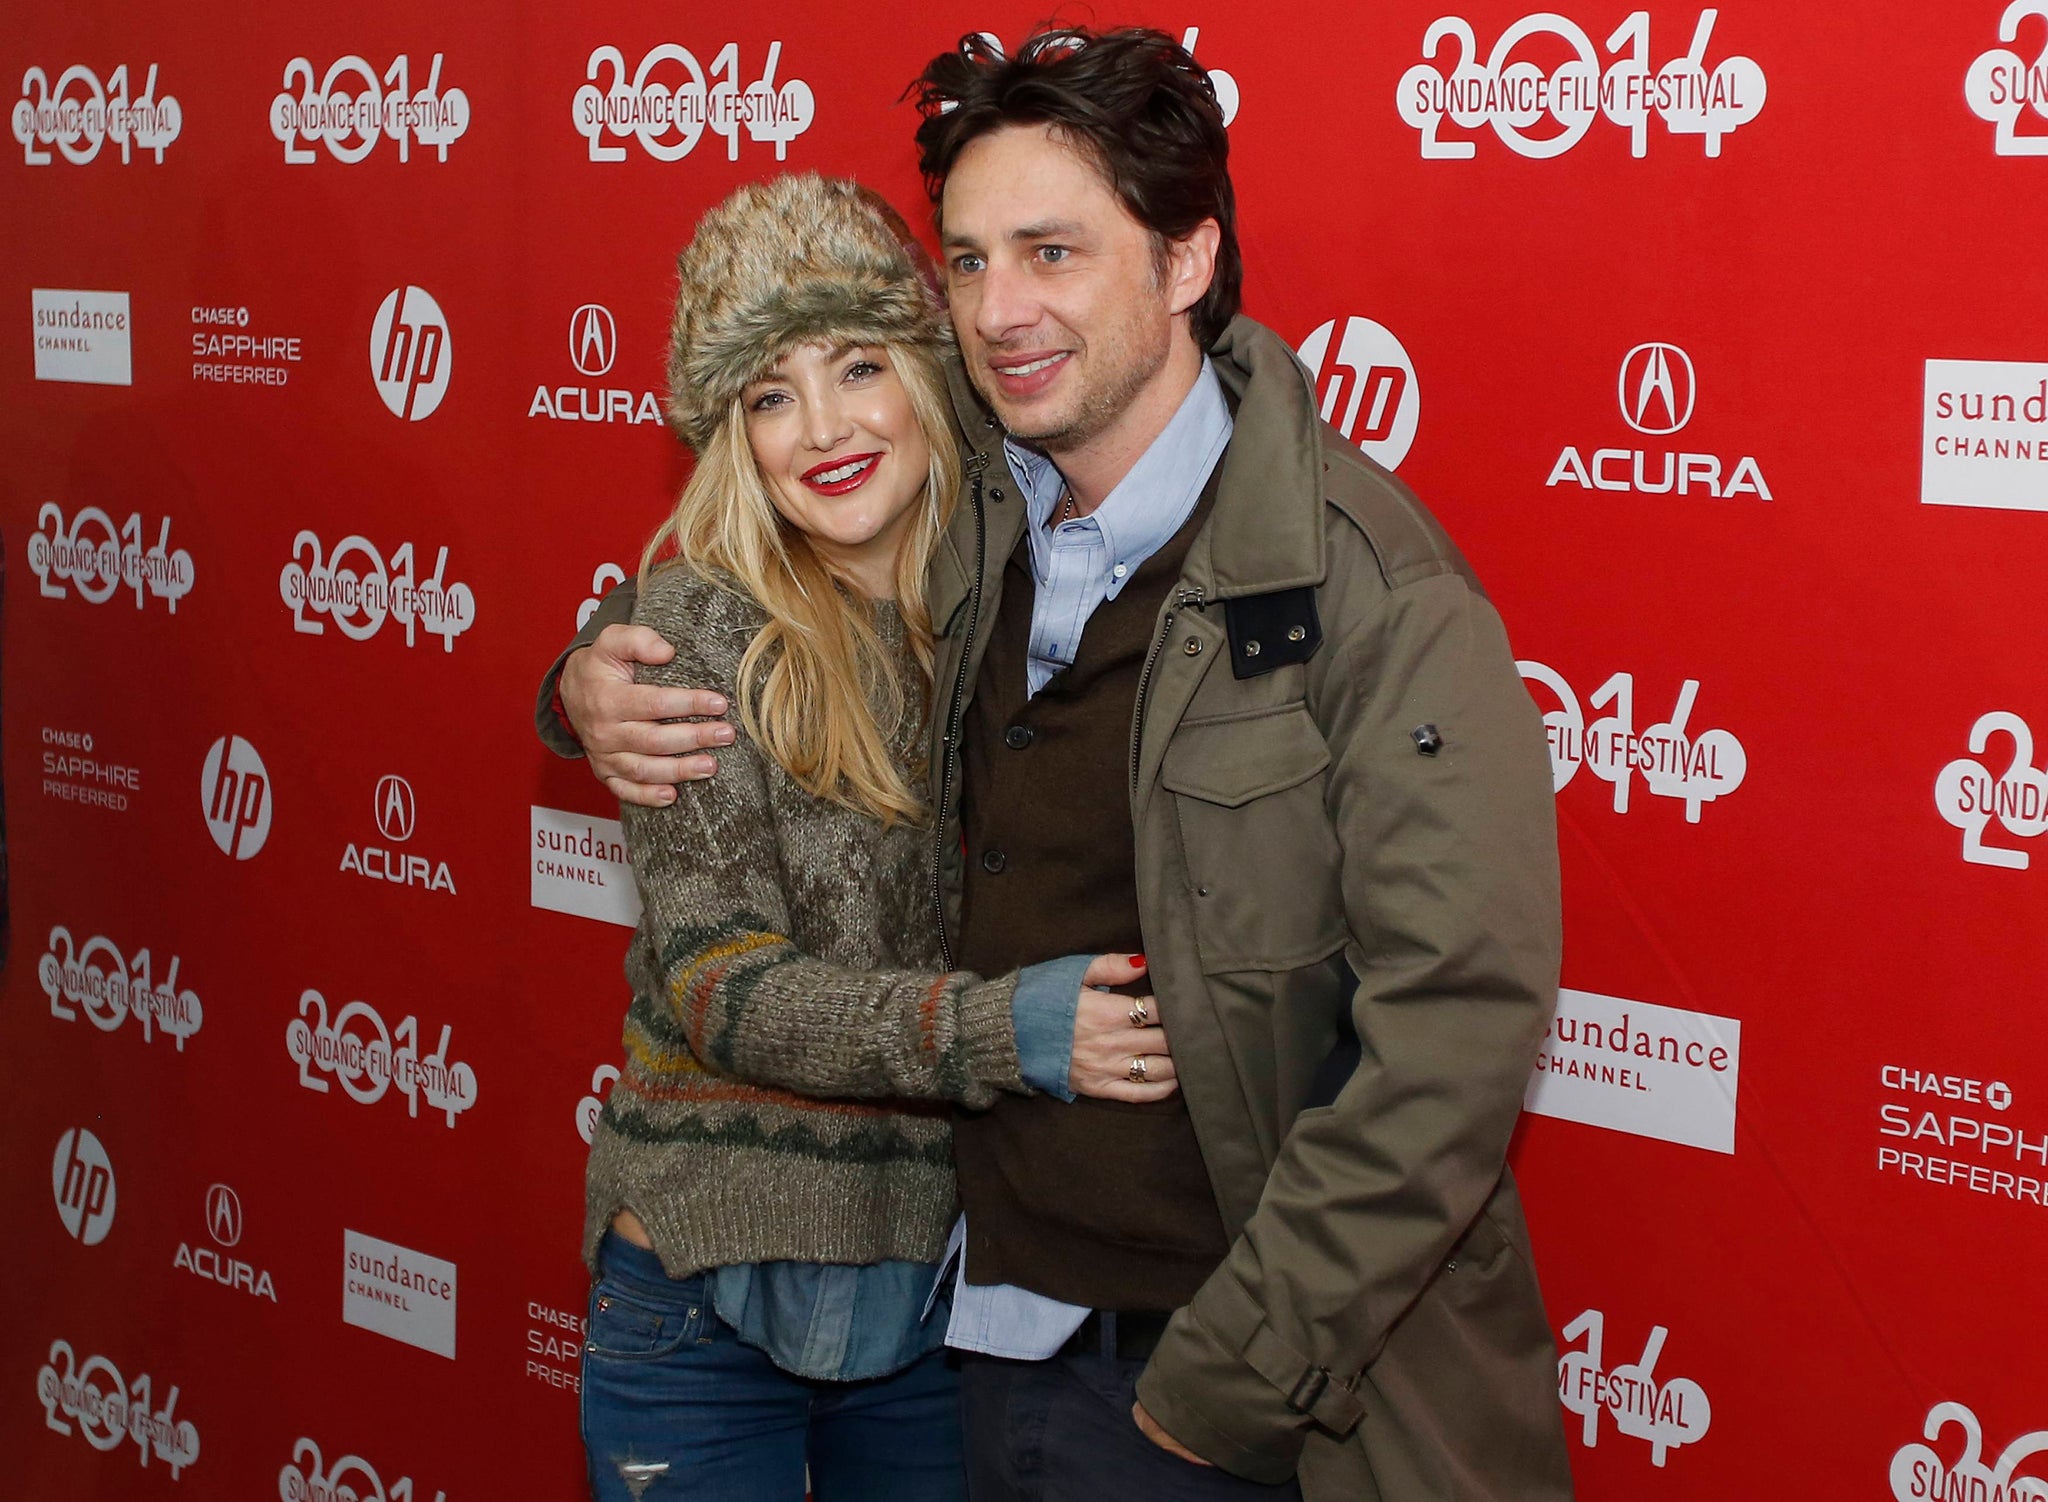 Zach Braff and Kate Hudson at the premiere of Braff's new film 'Wish I Was Here'